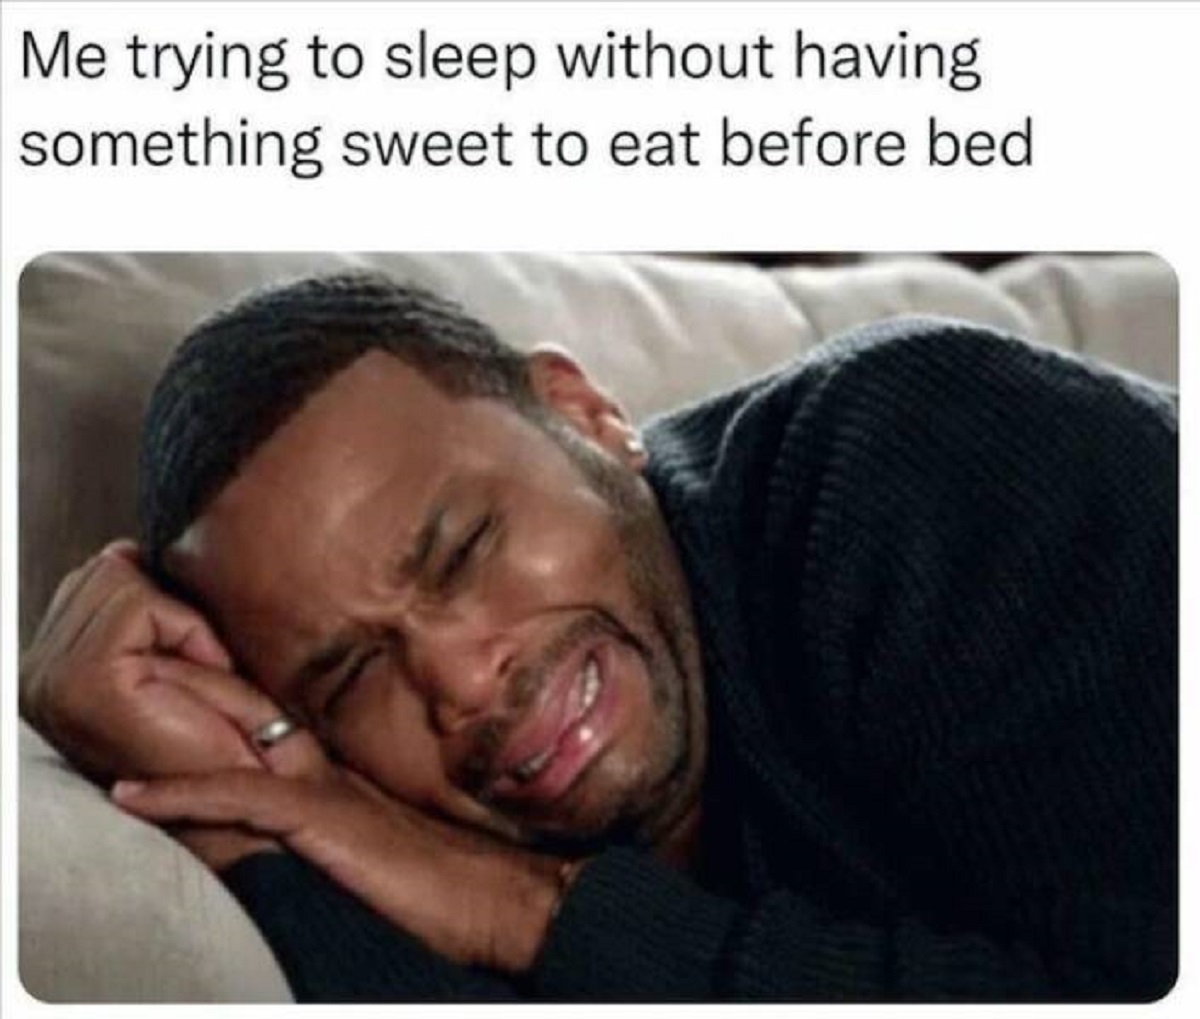 lol sad gif - Me trying to sleep without having something sweet to eat before bed